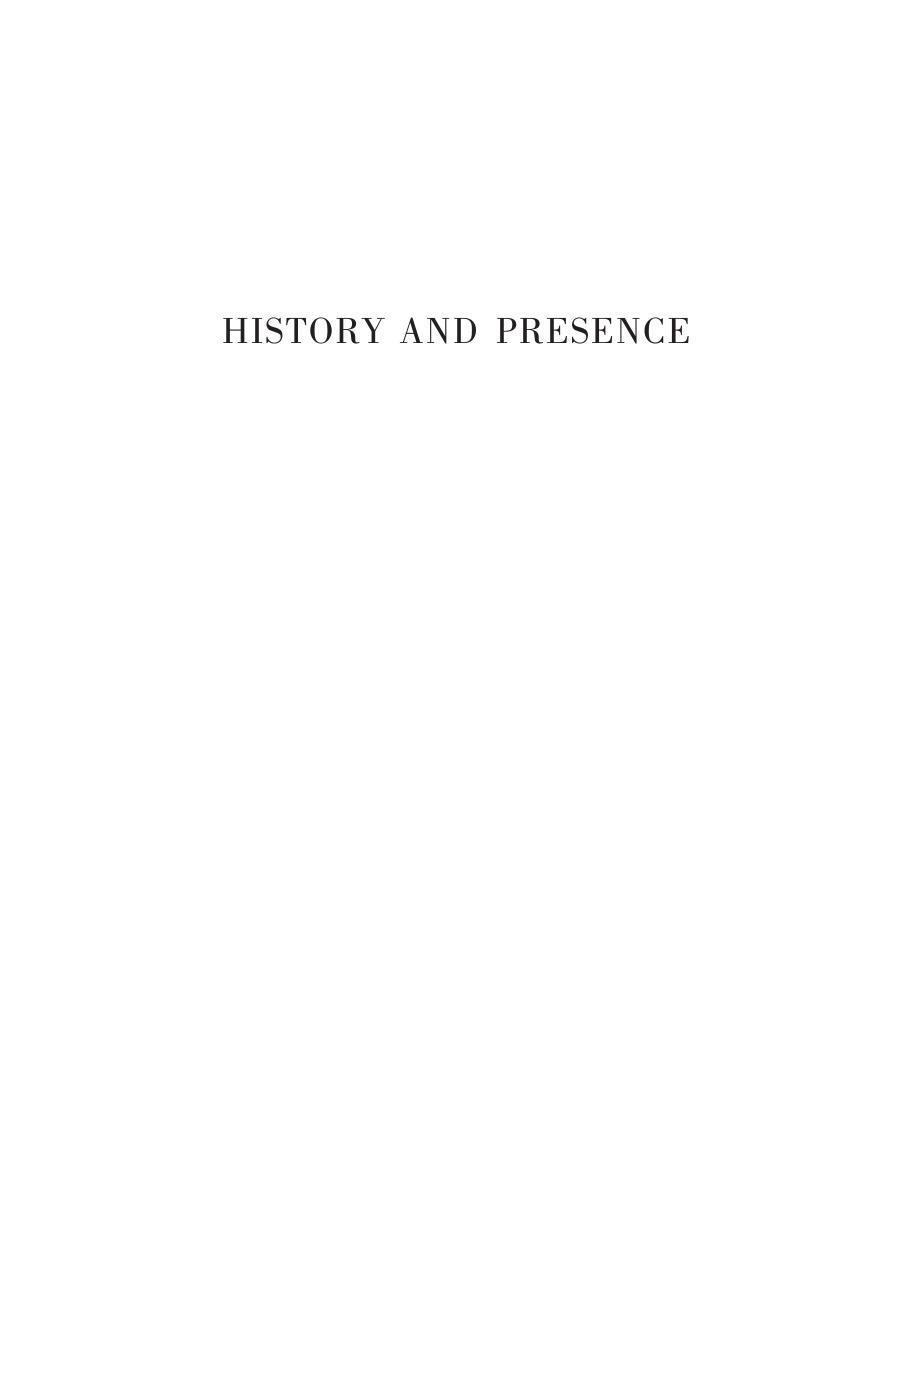 History and Presence by Robert A. Orsi